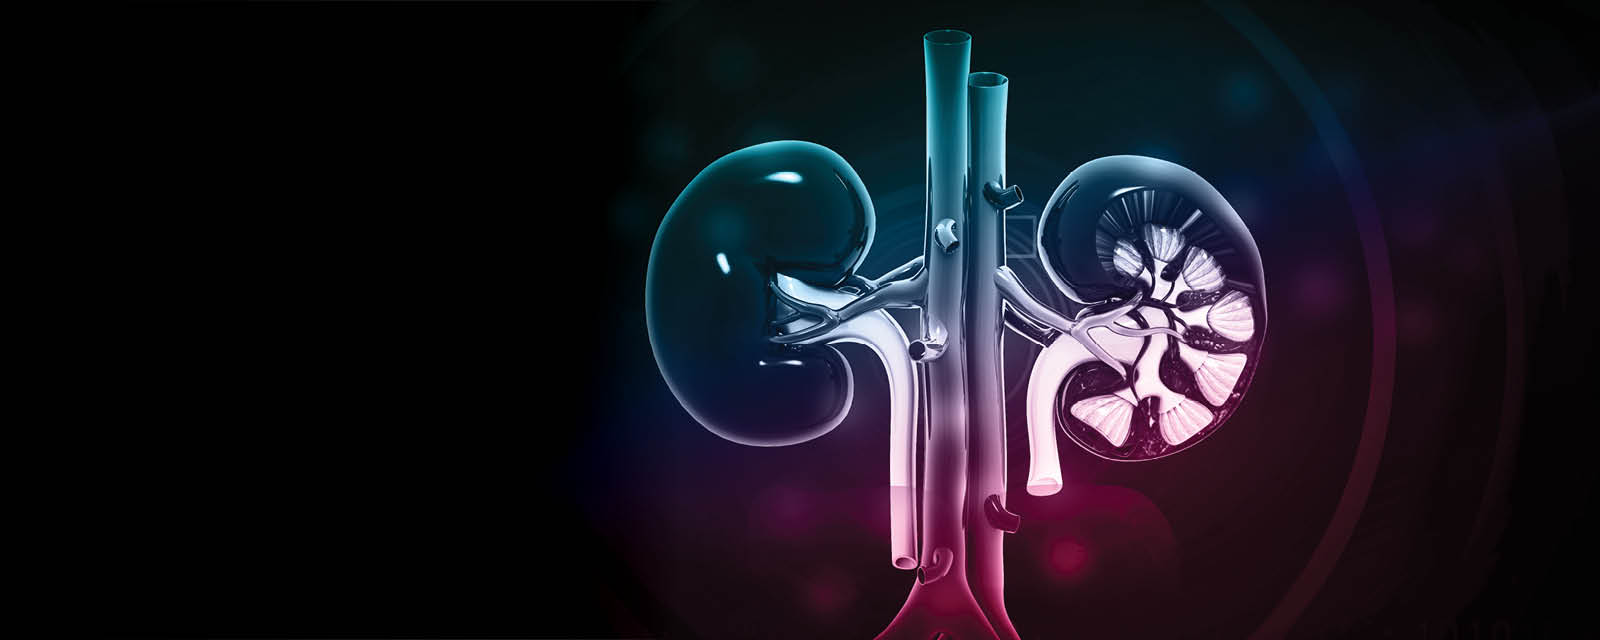 Kidney and Beyond Ad 1600x640